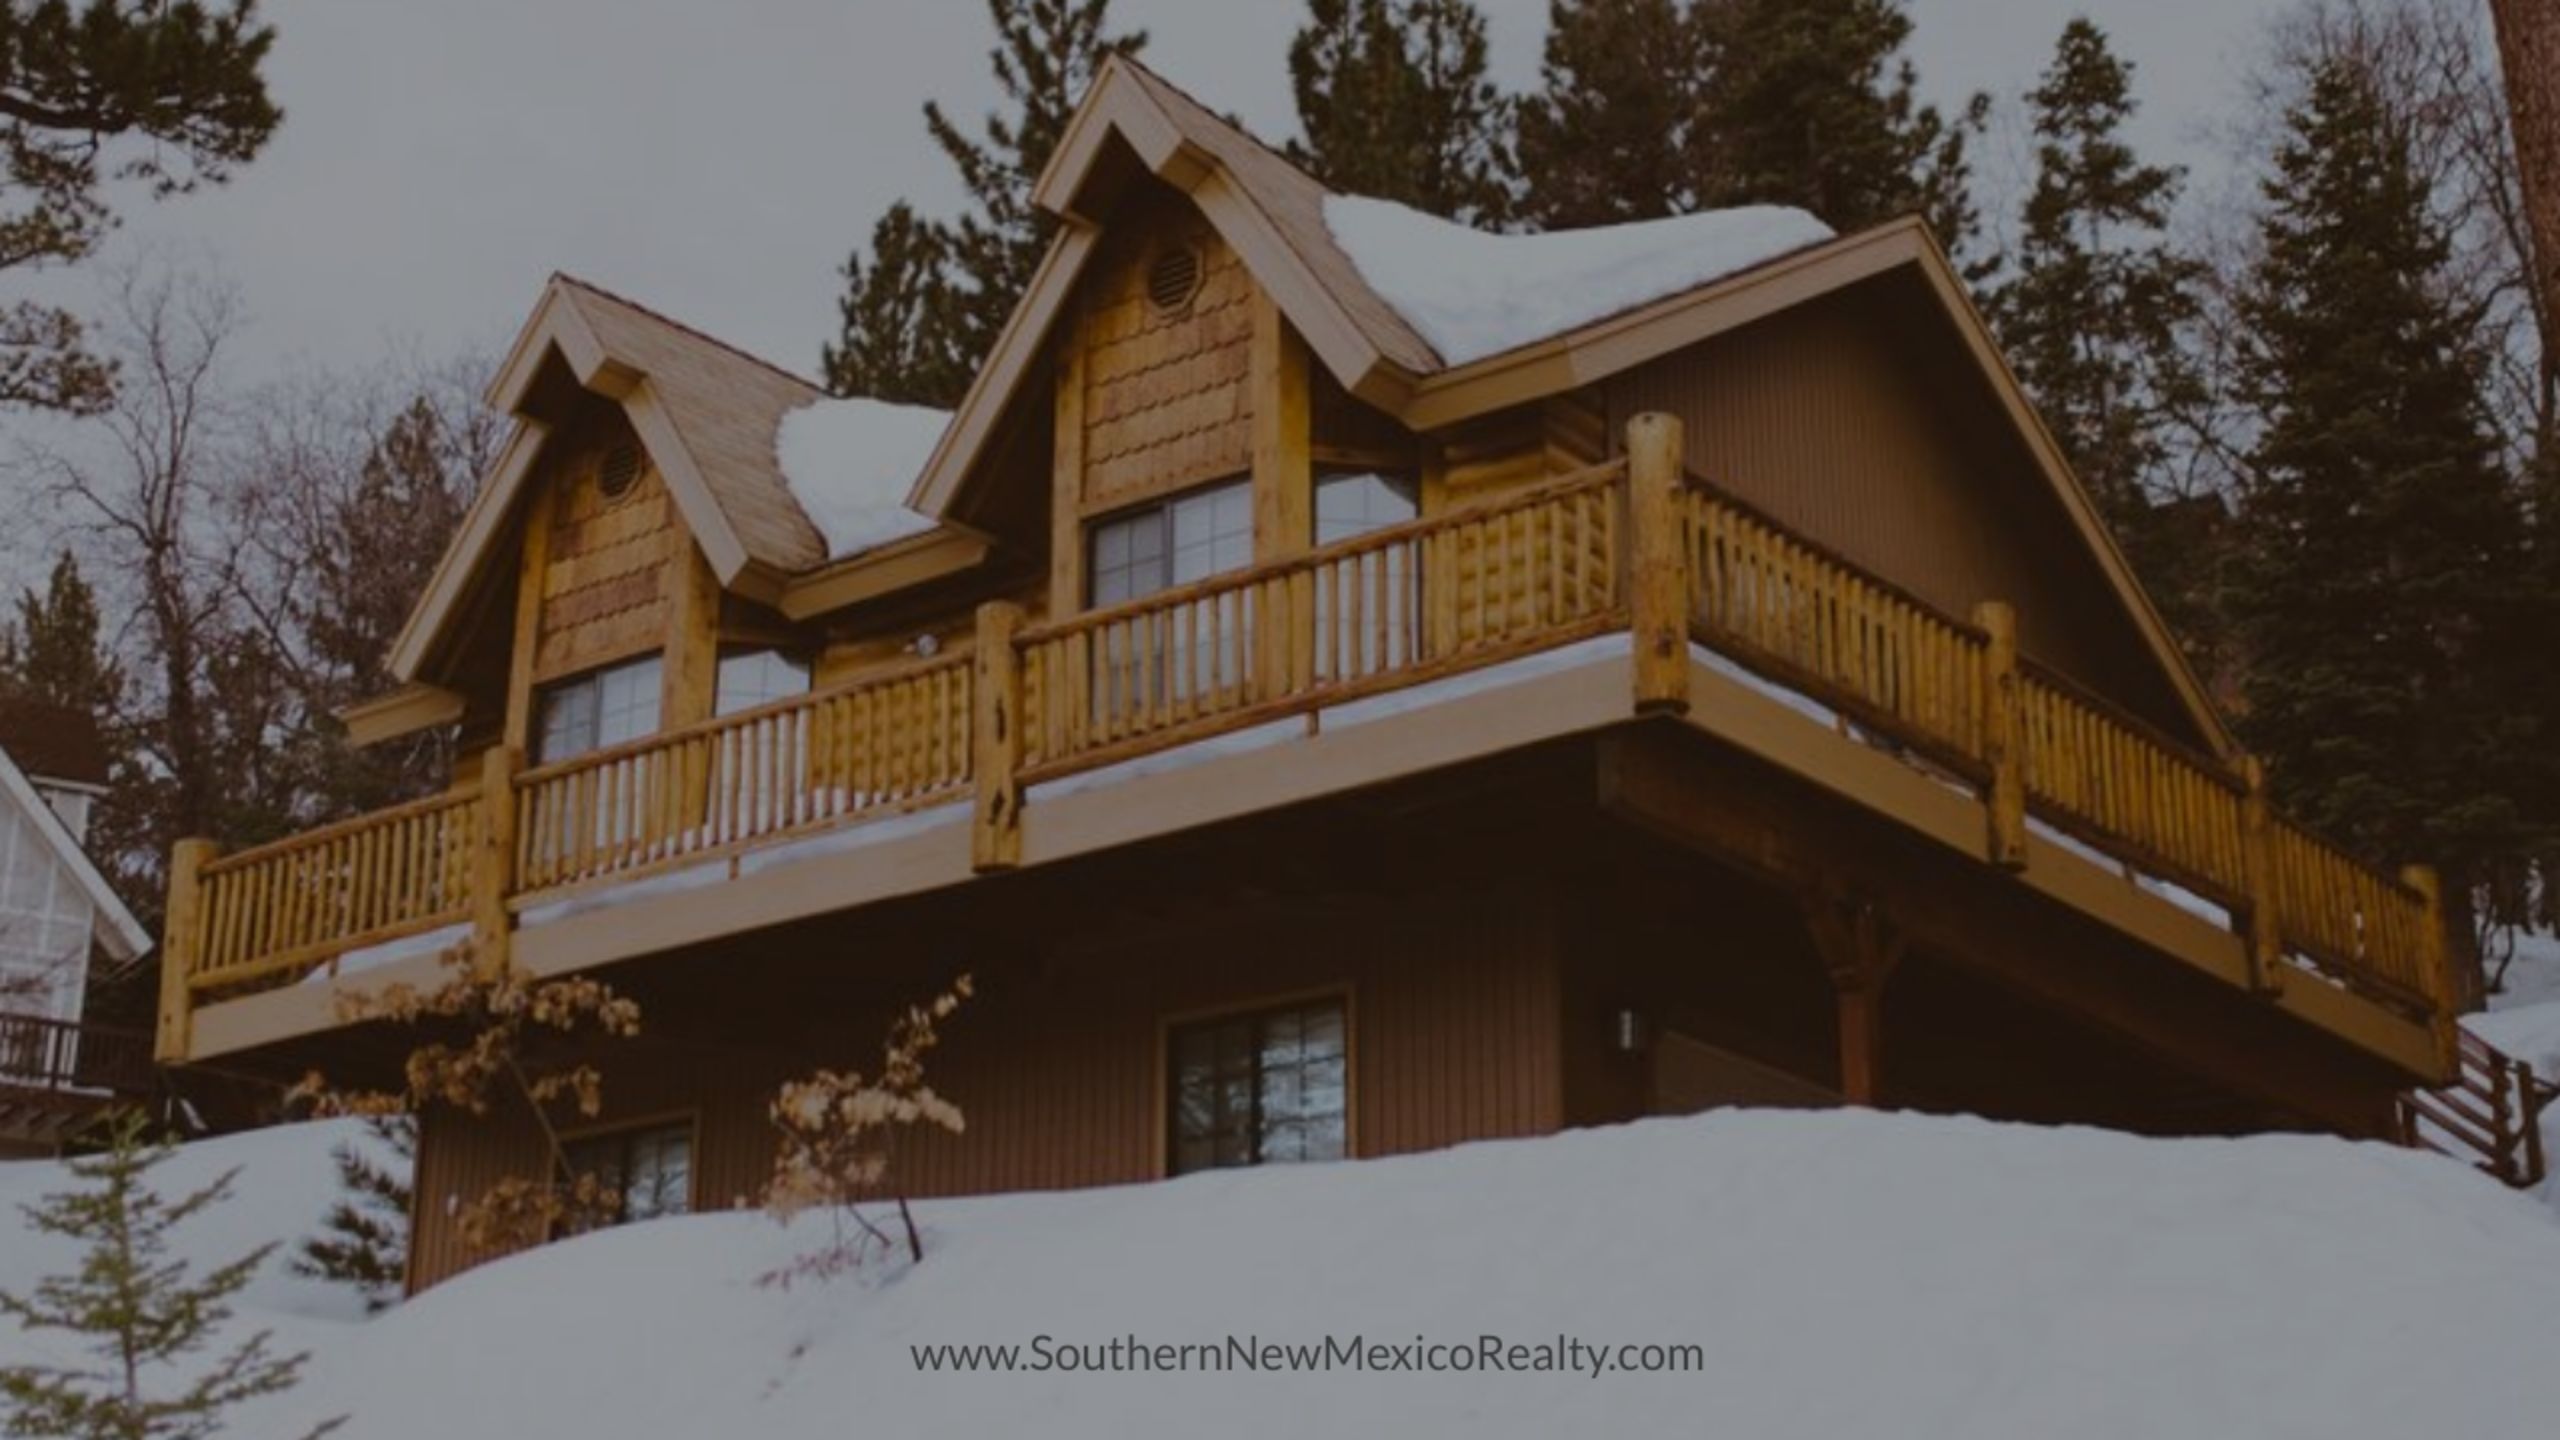 6 Ideas to Help Sell Your New Mexico House in the Winter